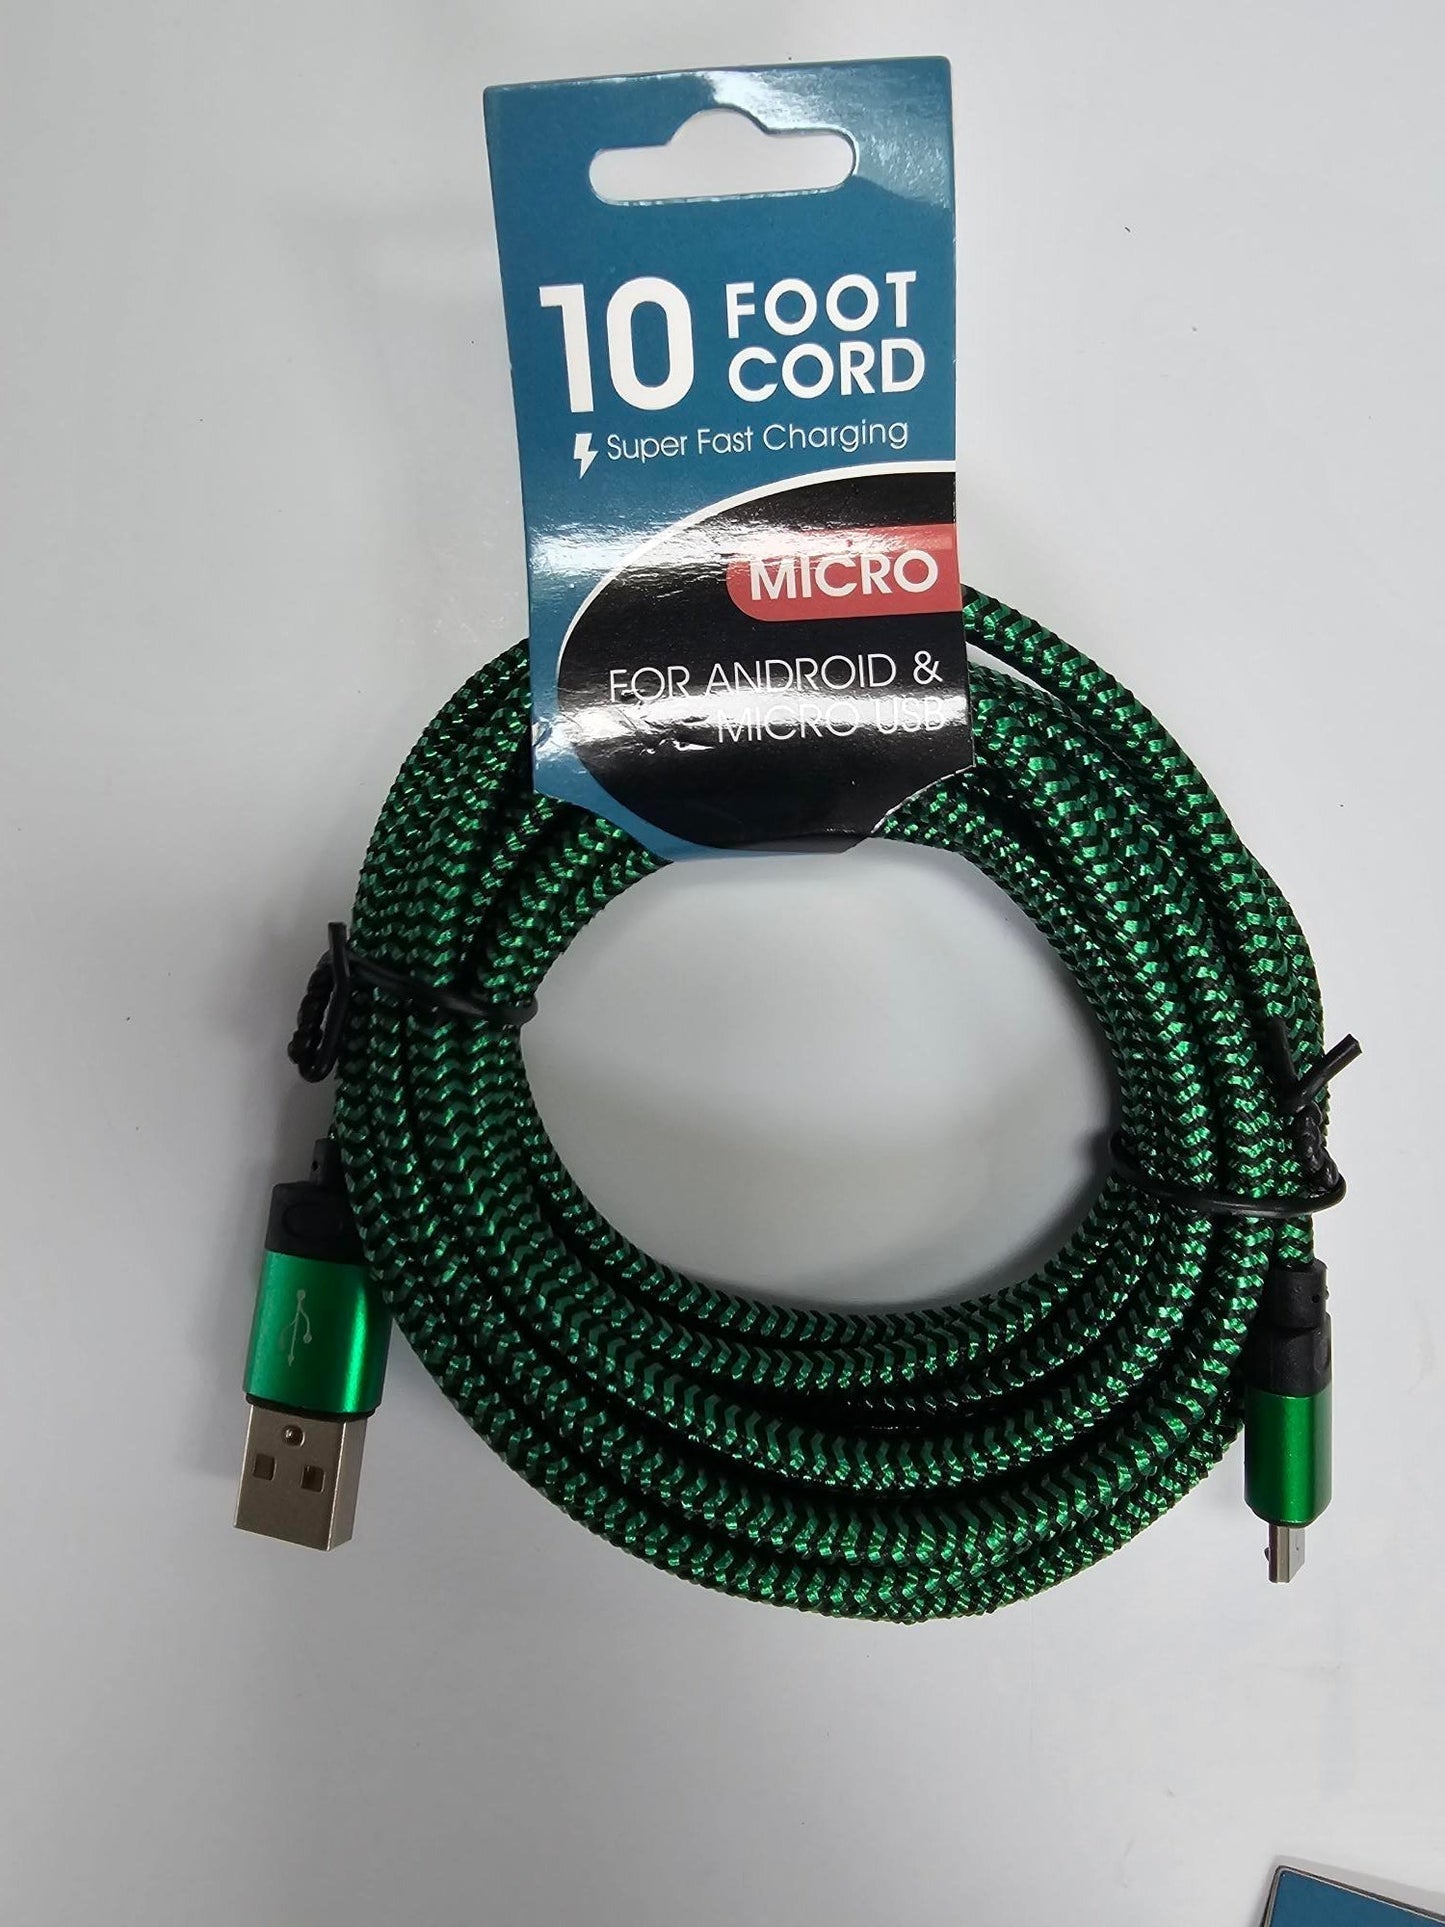 Android & Micro USB Fast Charging Cord - 10 ft 